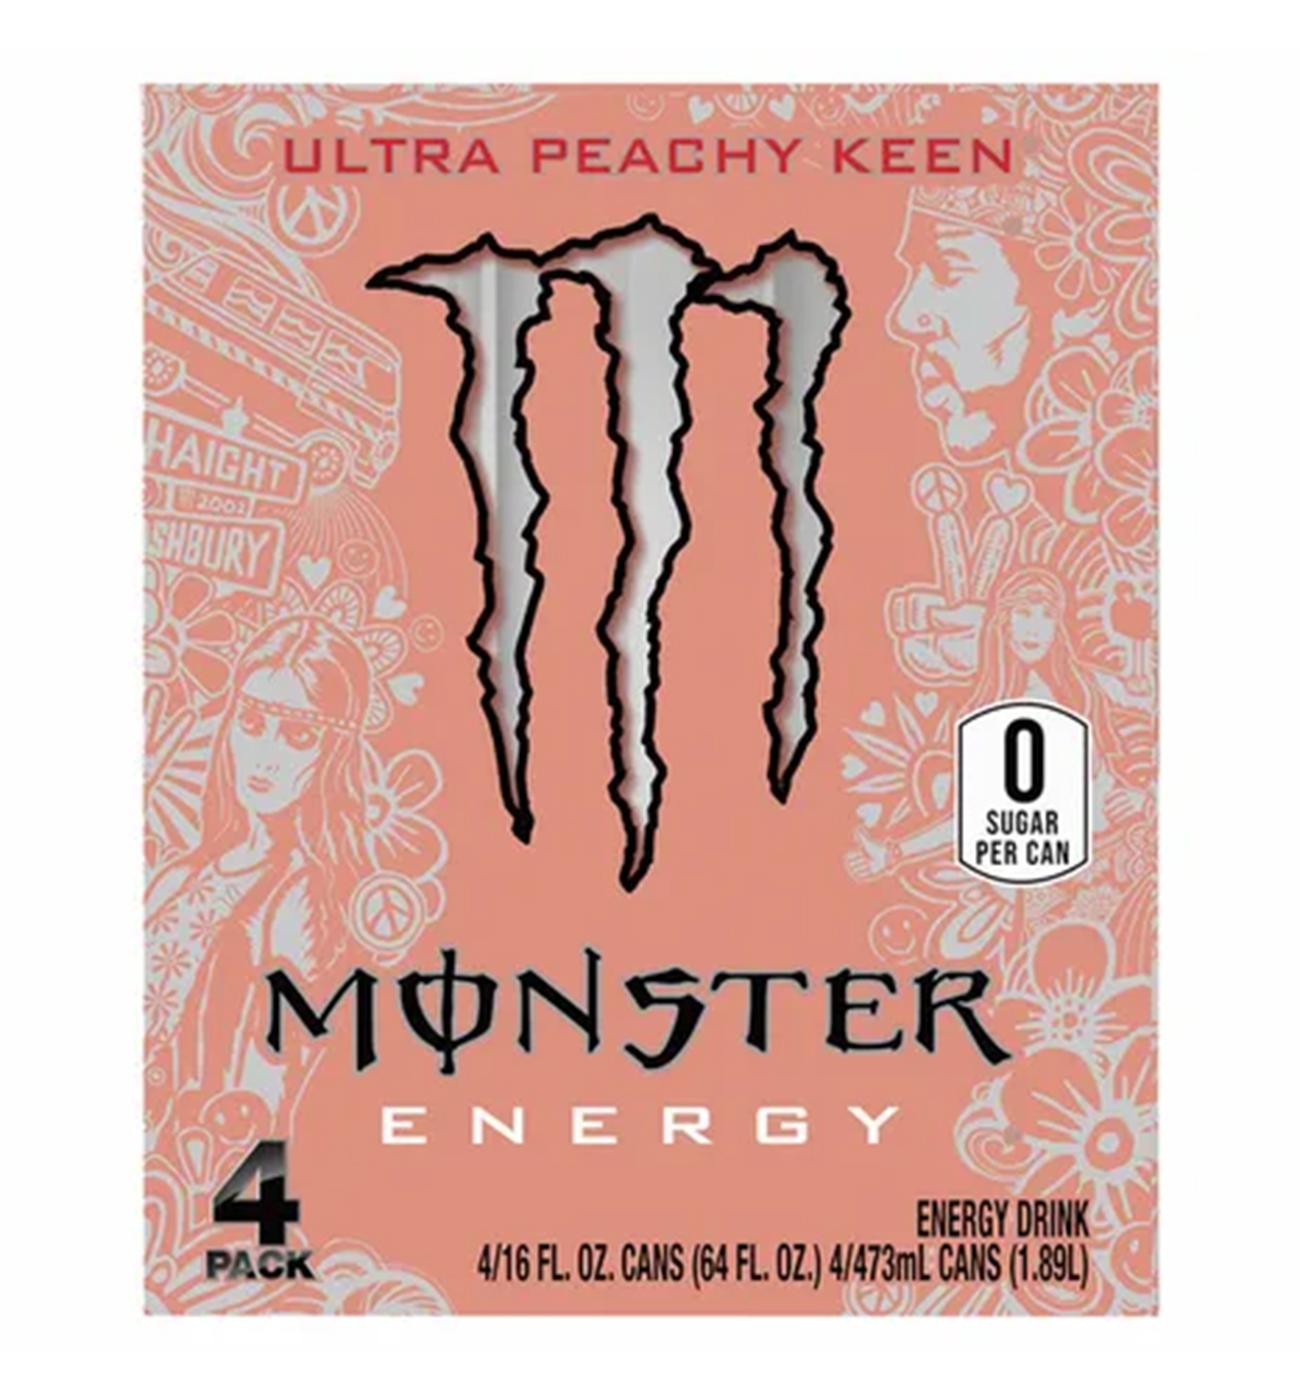 Monster Energy Ultra Peachy Keen Energy Drink 4 pk Cans; image 1 of 2